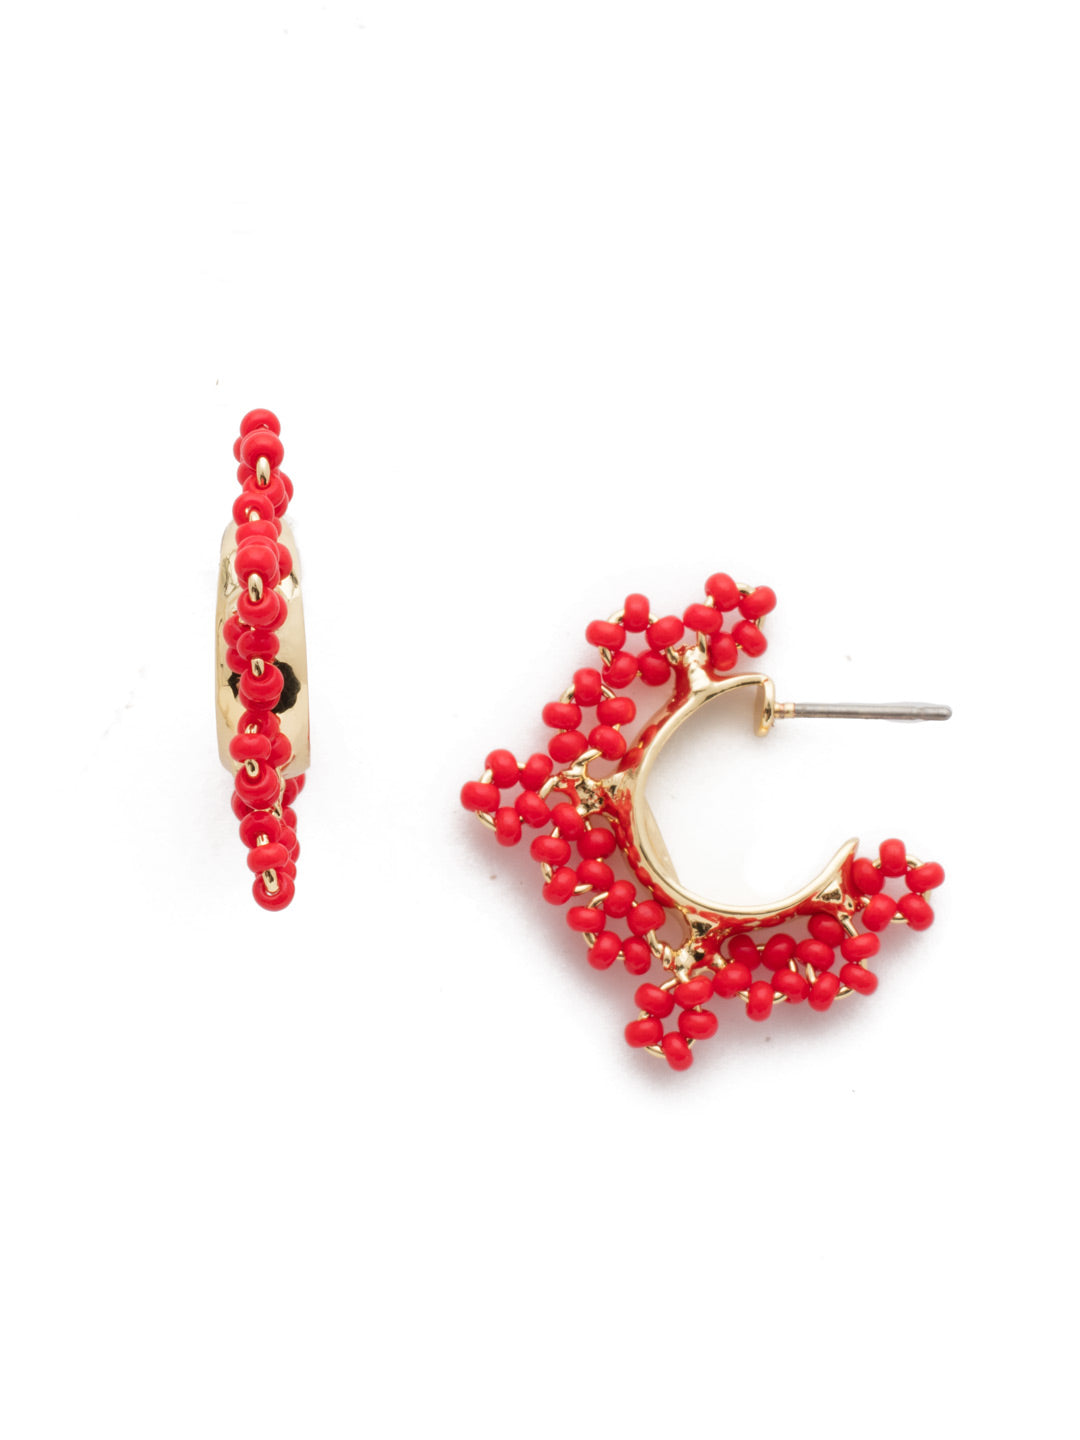 Sefina Small Hoop Earring - EEH25BGRCO - <p>Take some style with you when you put on these beaded beauties. They're a guaranteed good time. From Sorrelli's Red Coral collection in our Bright Gold-tone finish.</p>